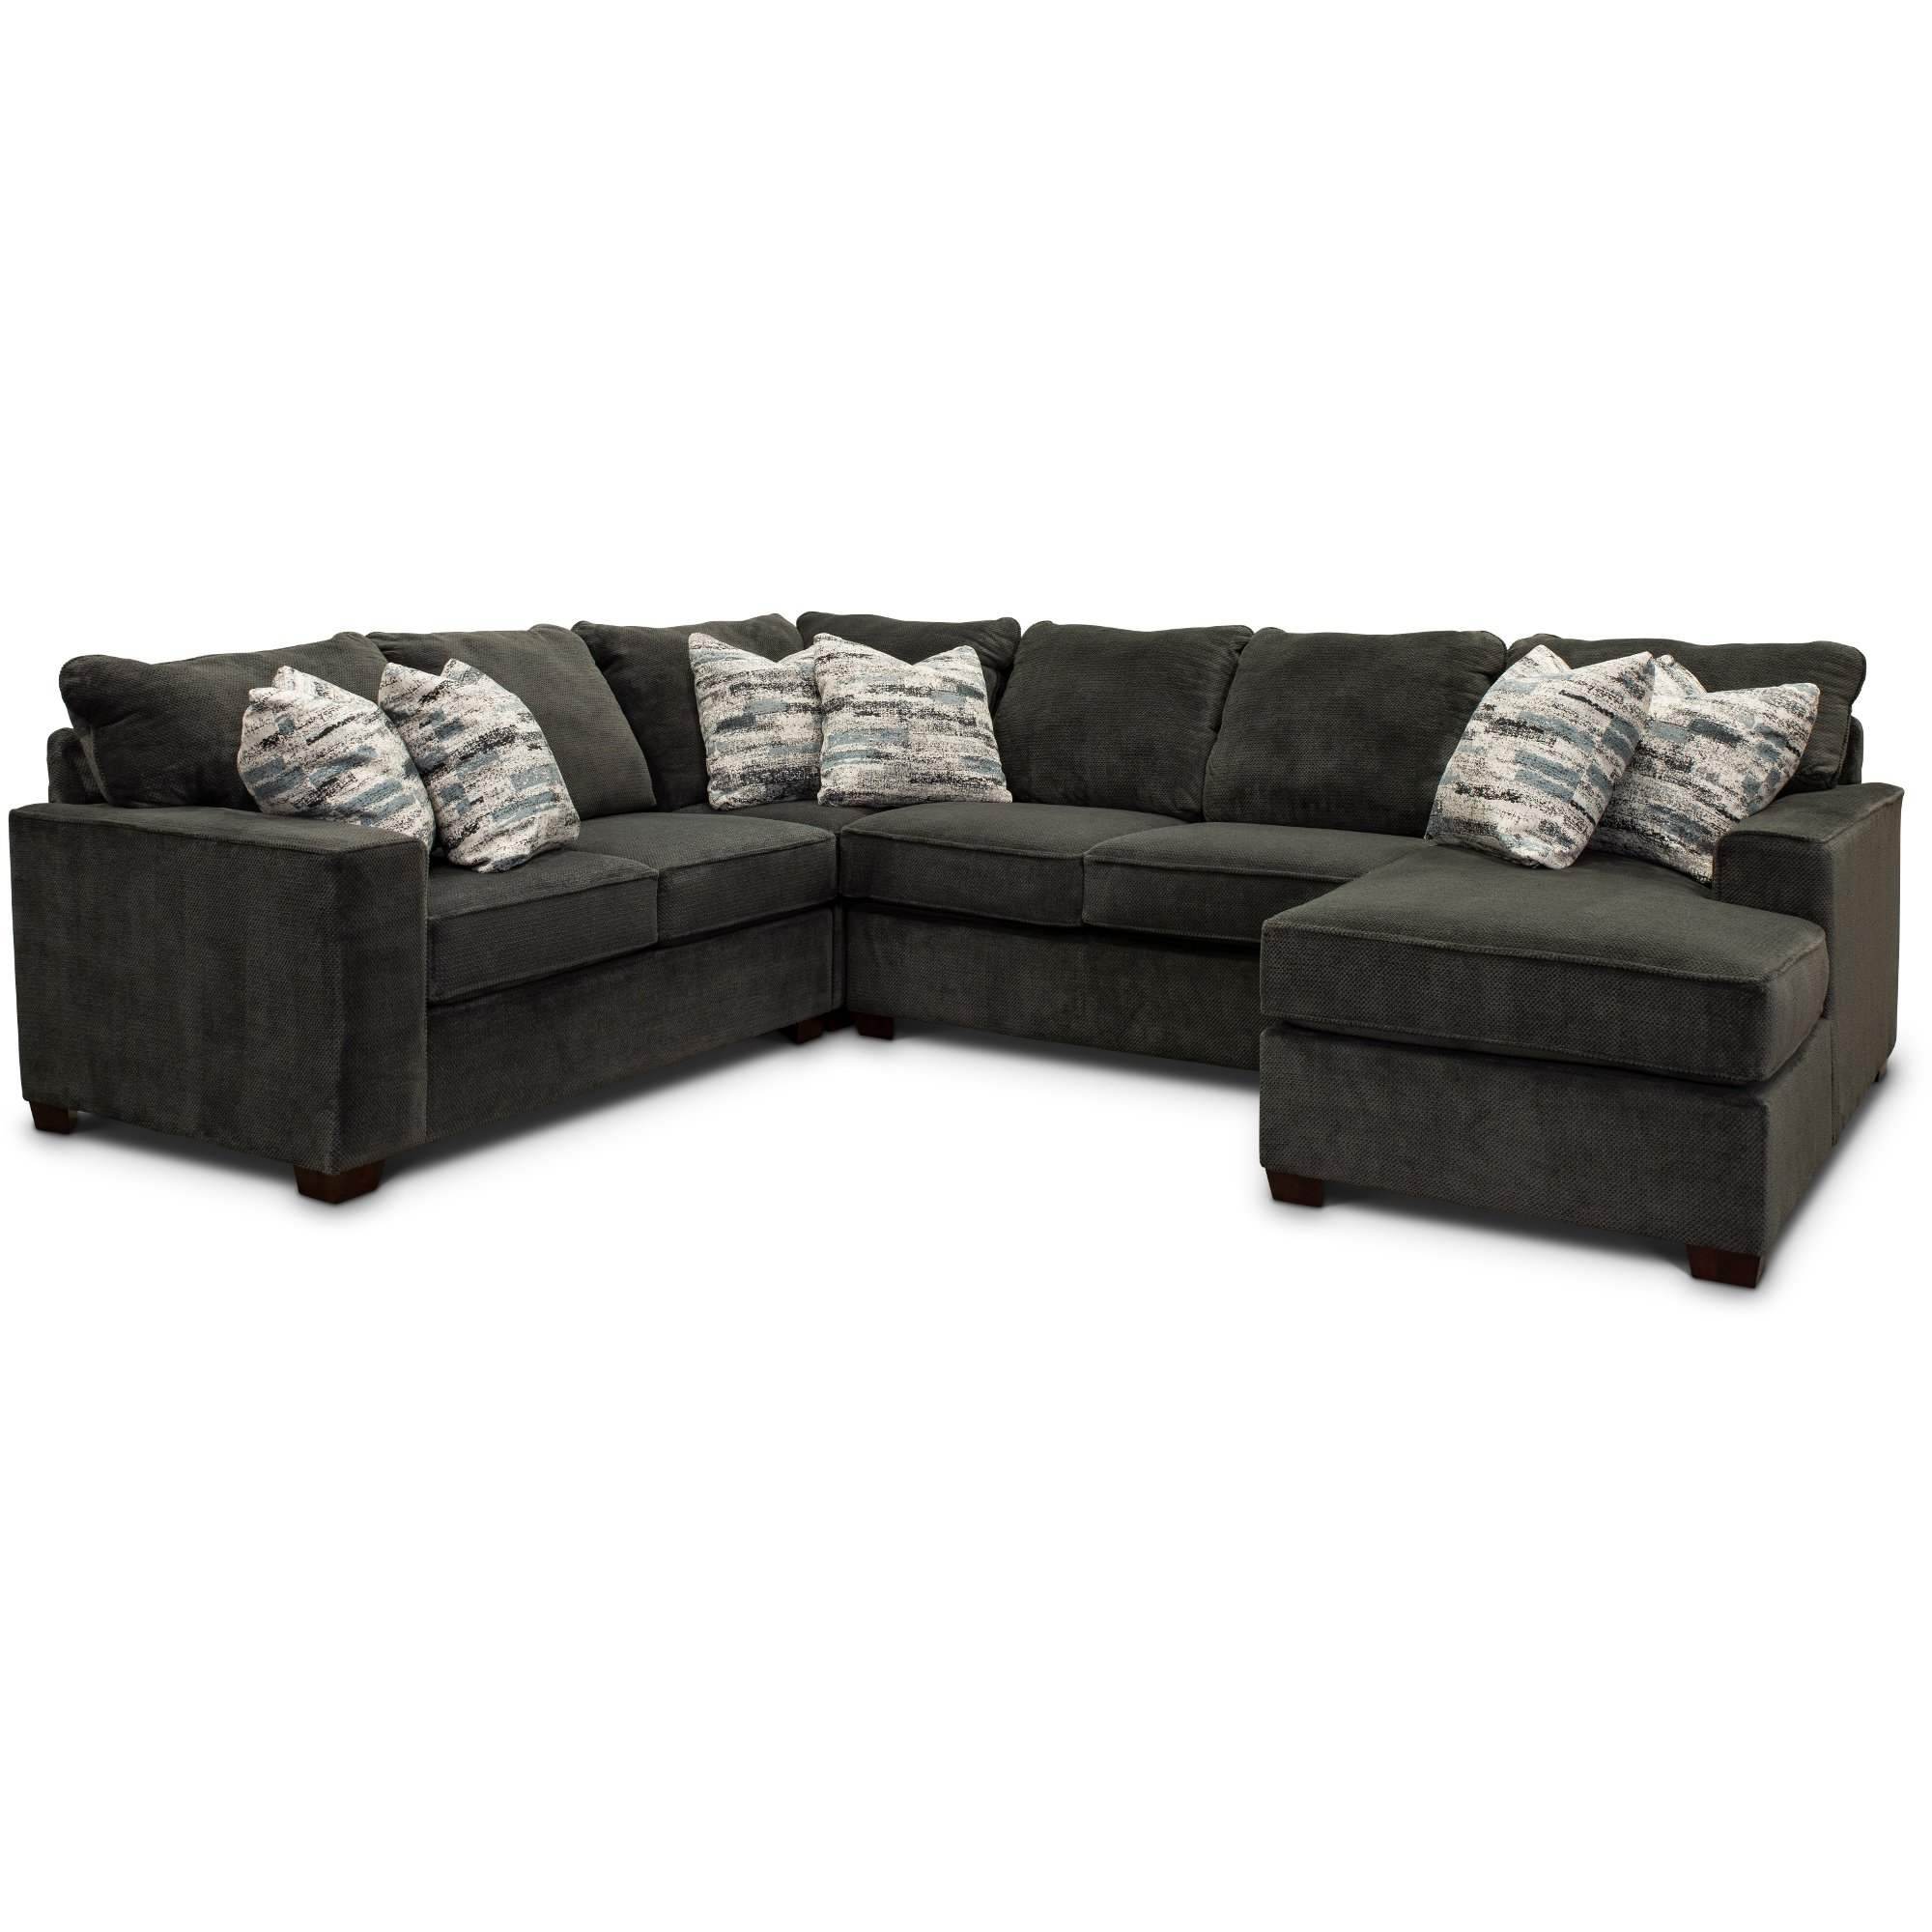 Dark Gray 4 Piece Sectional Sofa with LAF Loveseat - Autumn | RC Willey  Furniture Store